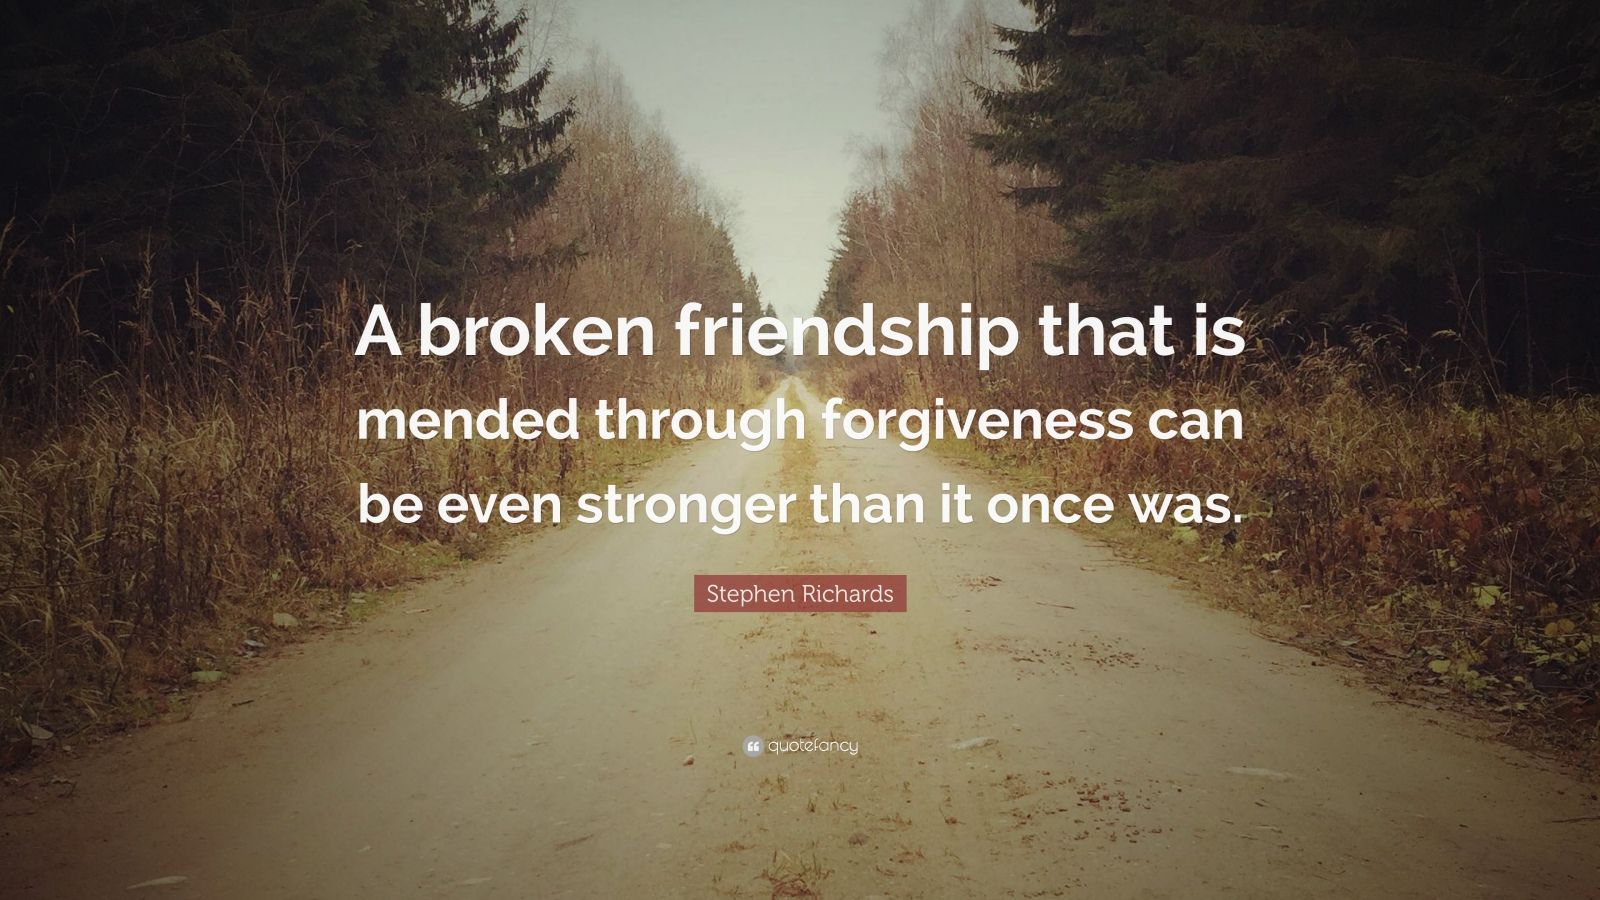 Stephen Richards Quote “a Broken Friendship That Is Mended Through Forgiveness Can Be Even